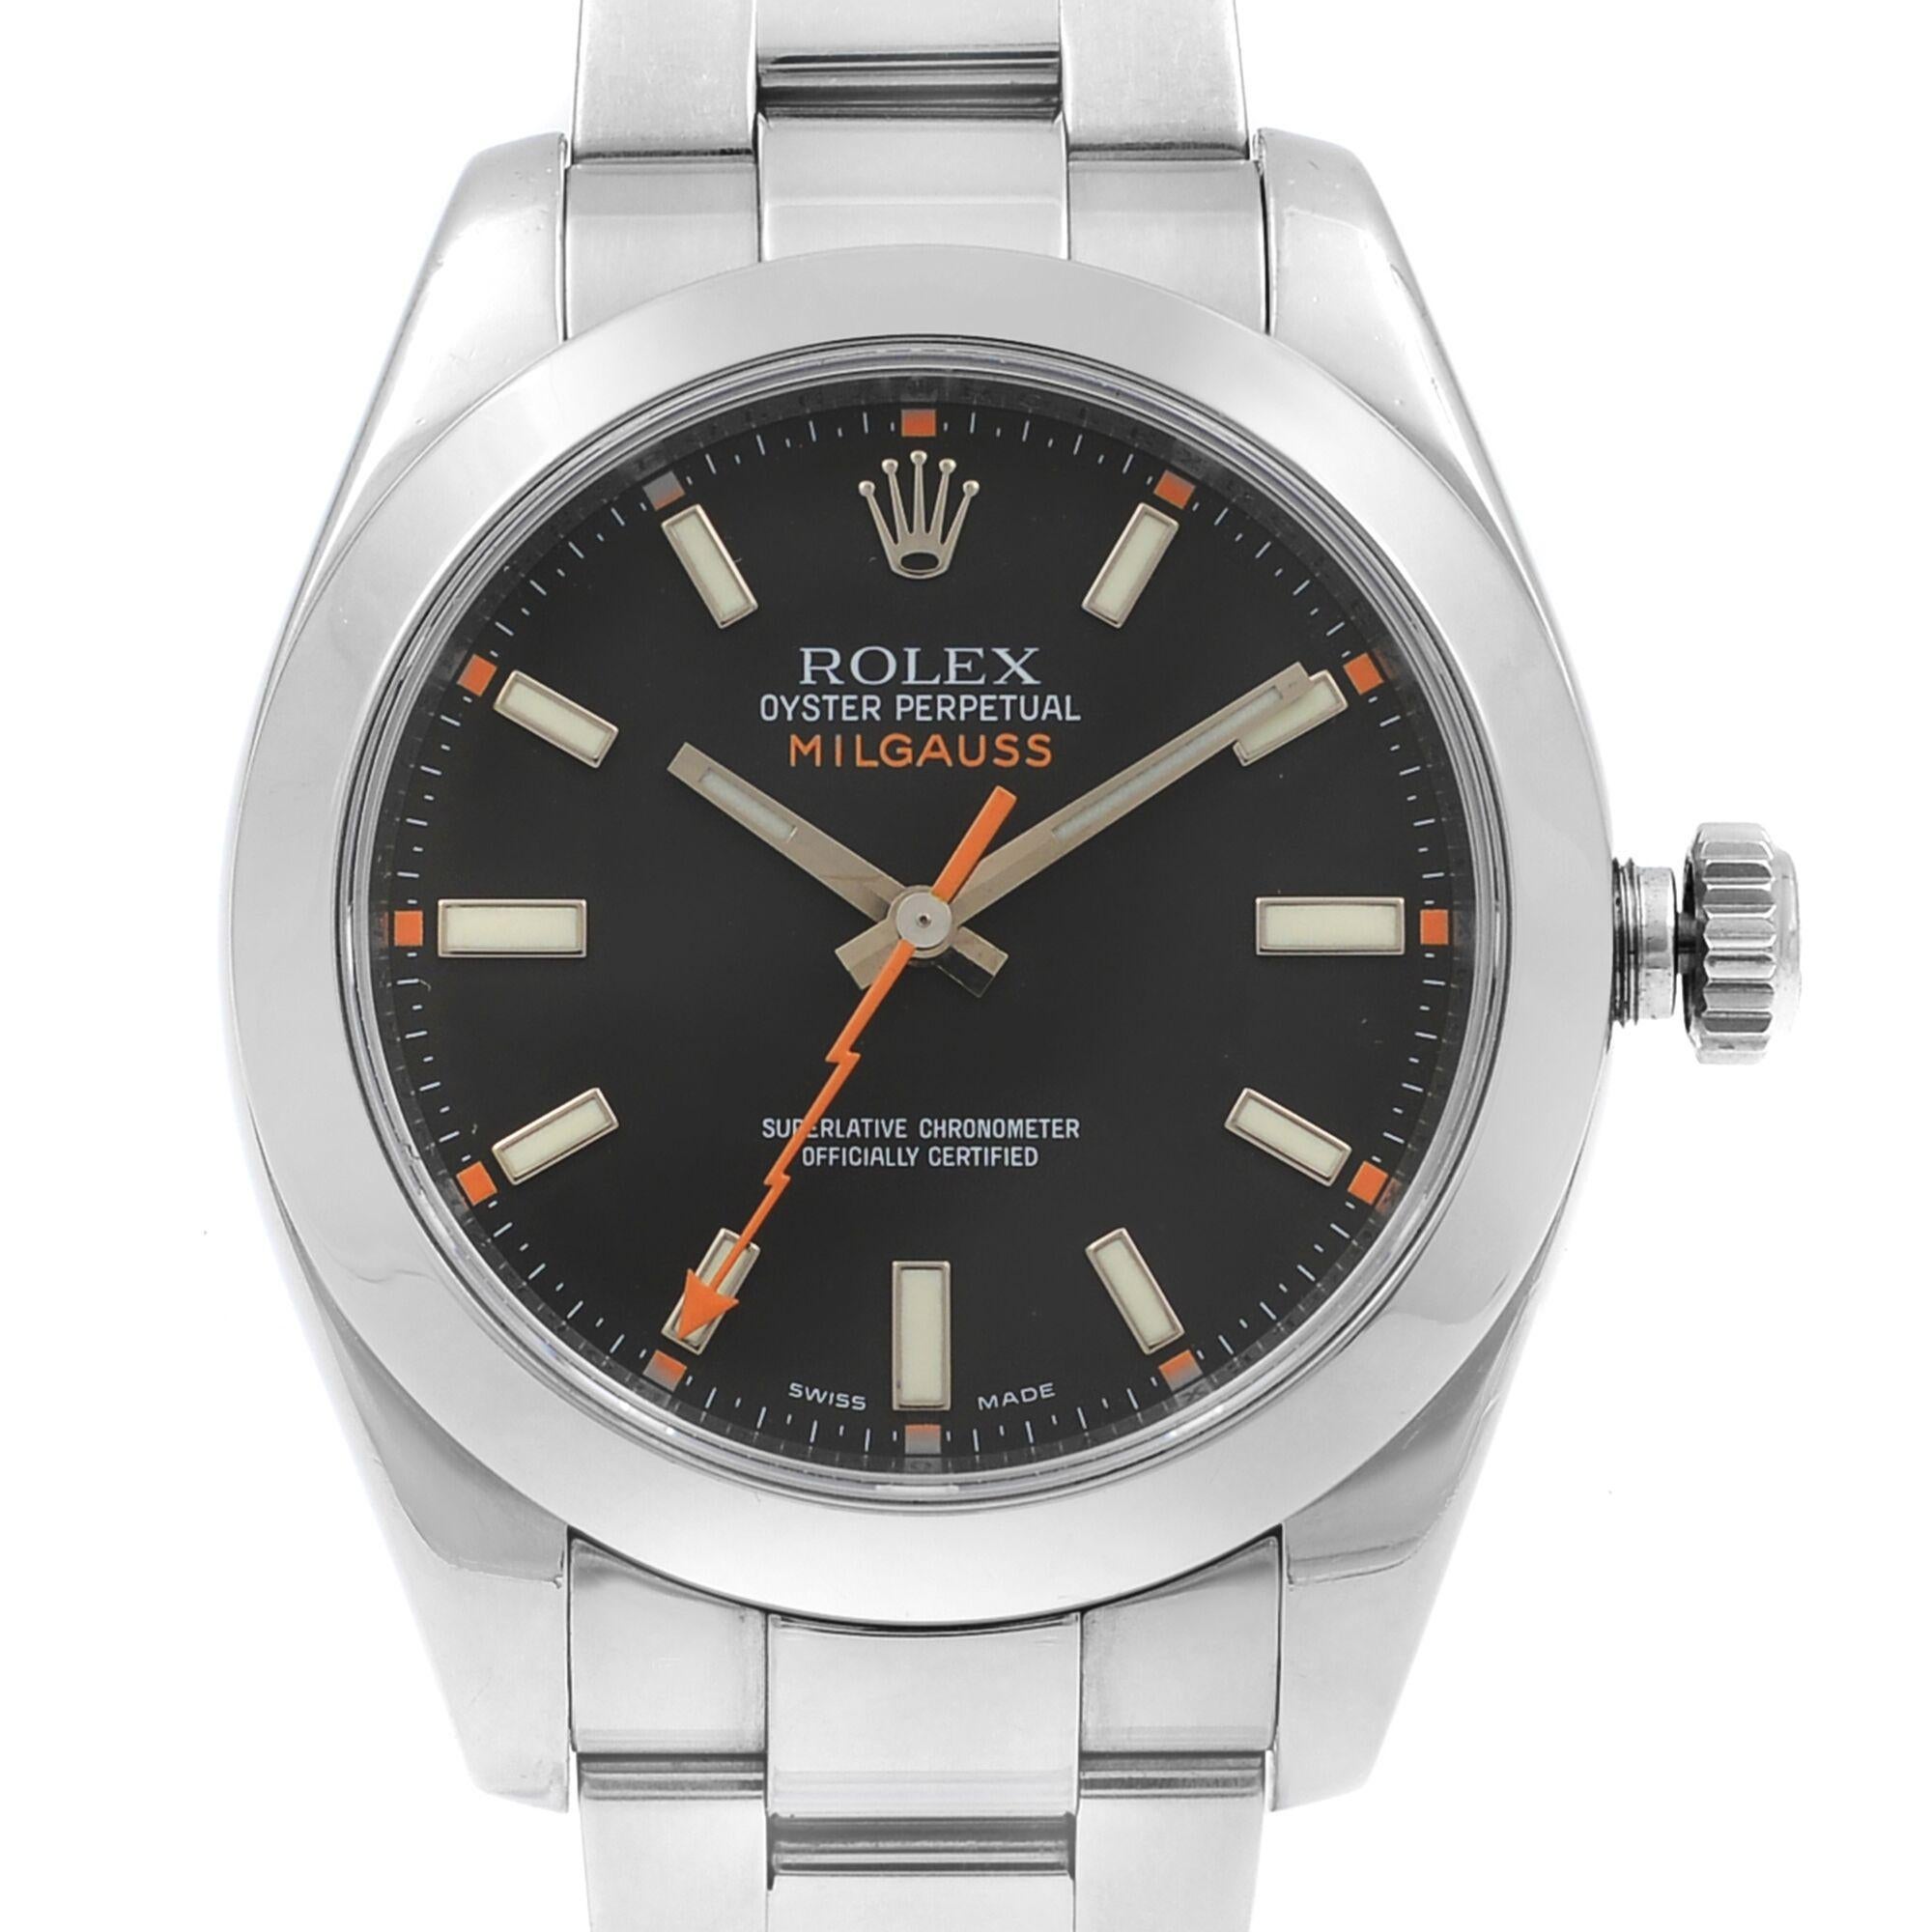 This pre-owned Rolex Milgauss 116400 BKO is a beautiful men's timepiece that is powered by mechanical (automatic) movement which is cased in a stainless steel case. It has a round shape face, no features dial and has hand sticks style markers. It is